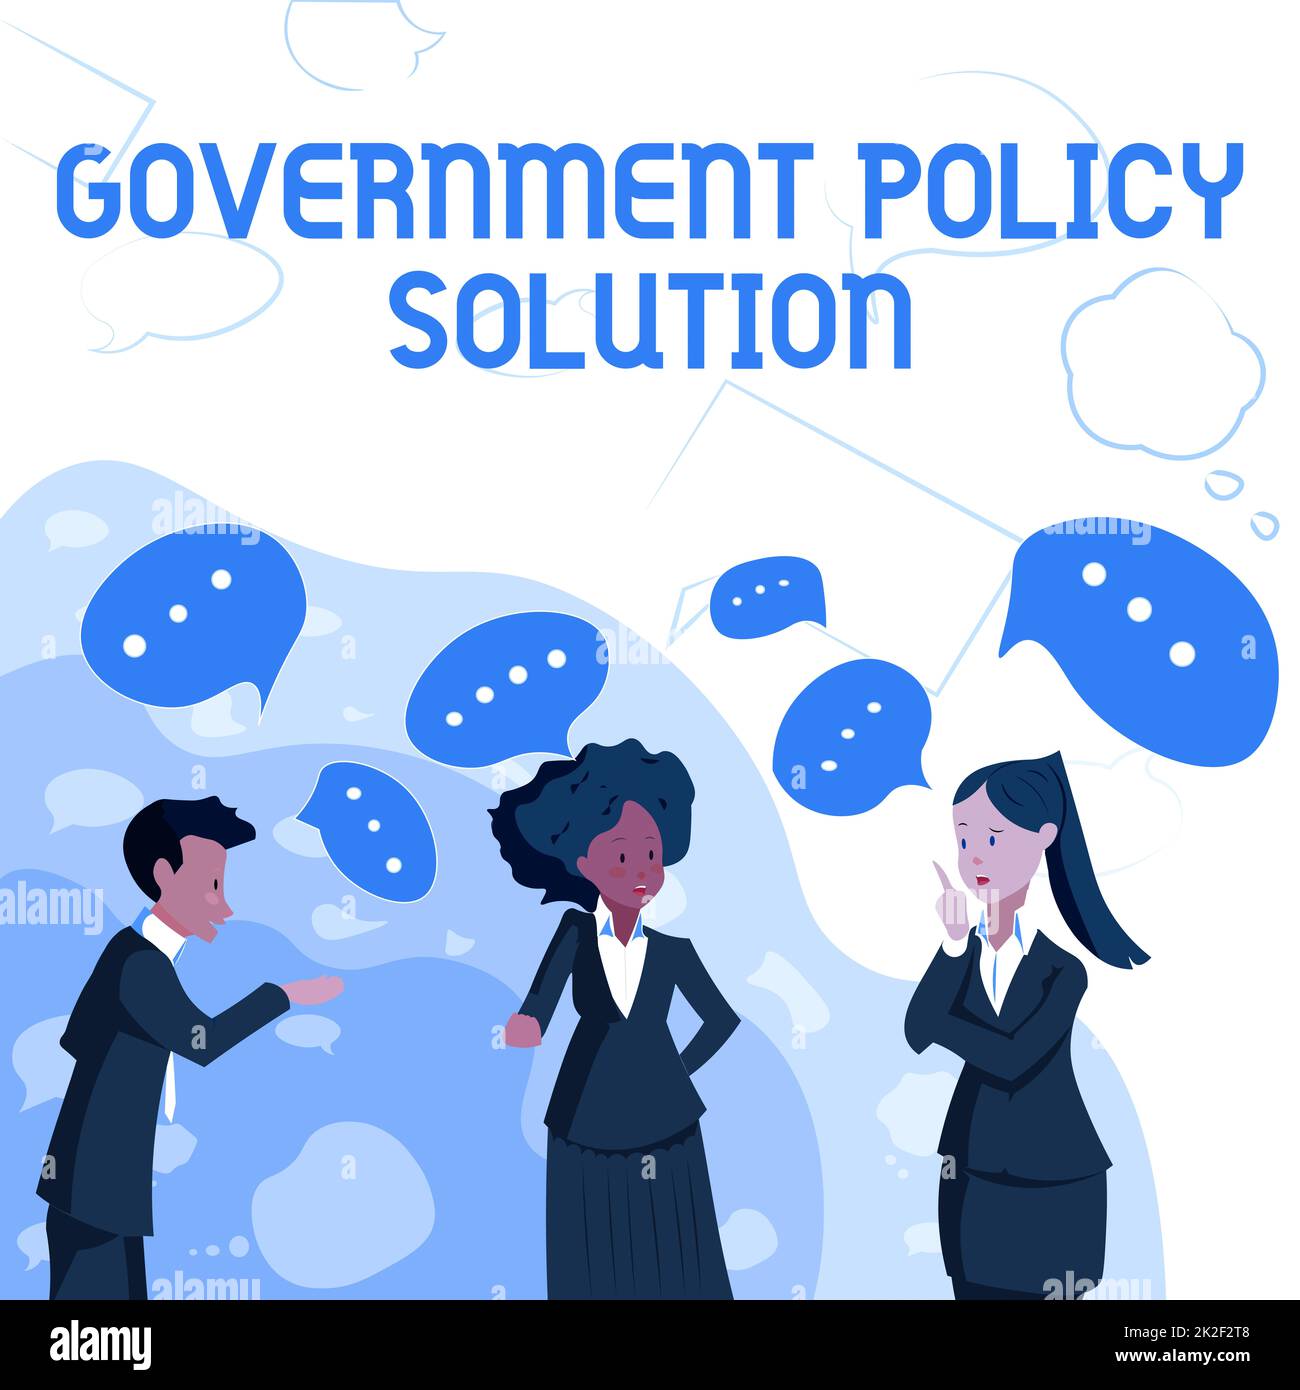 Text showing inspiration Government Policy Solution. Business showcase designed game plan created in response to emergency disaster Illustration Of Partners Building New Wonderful Ideas For Skills Improvement. Stock Photo